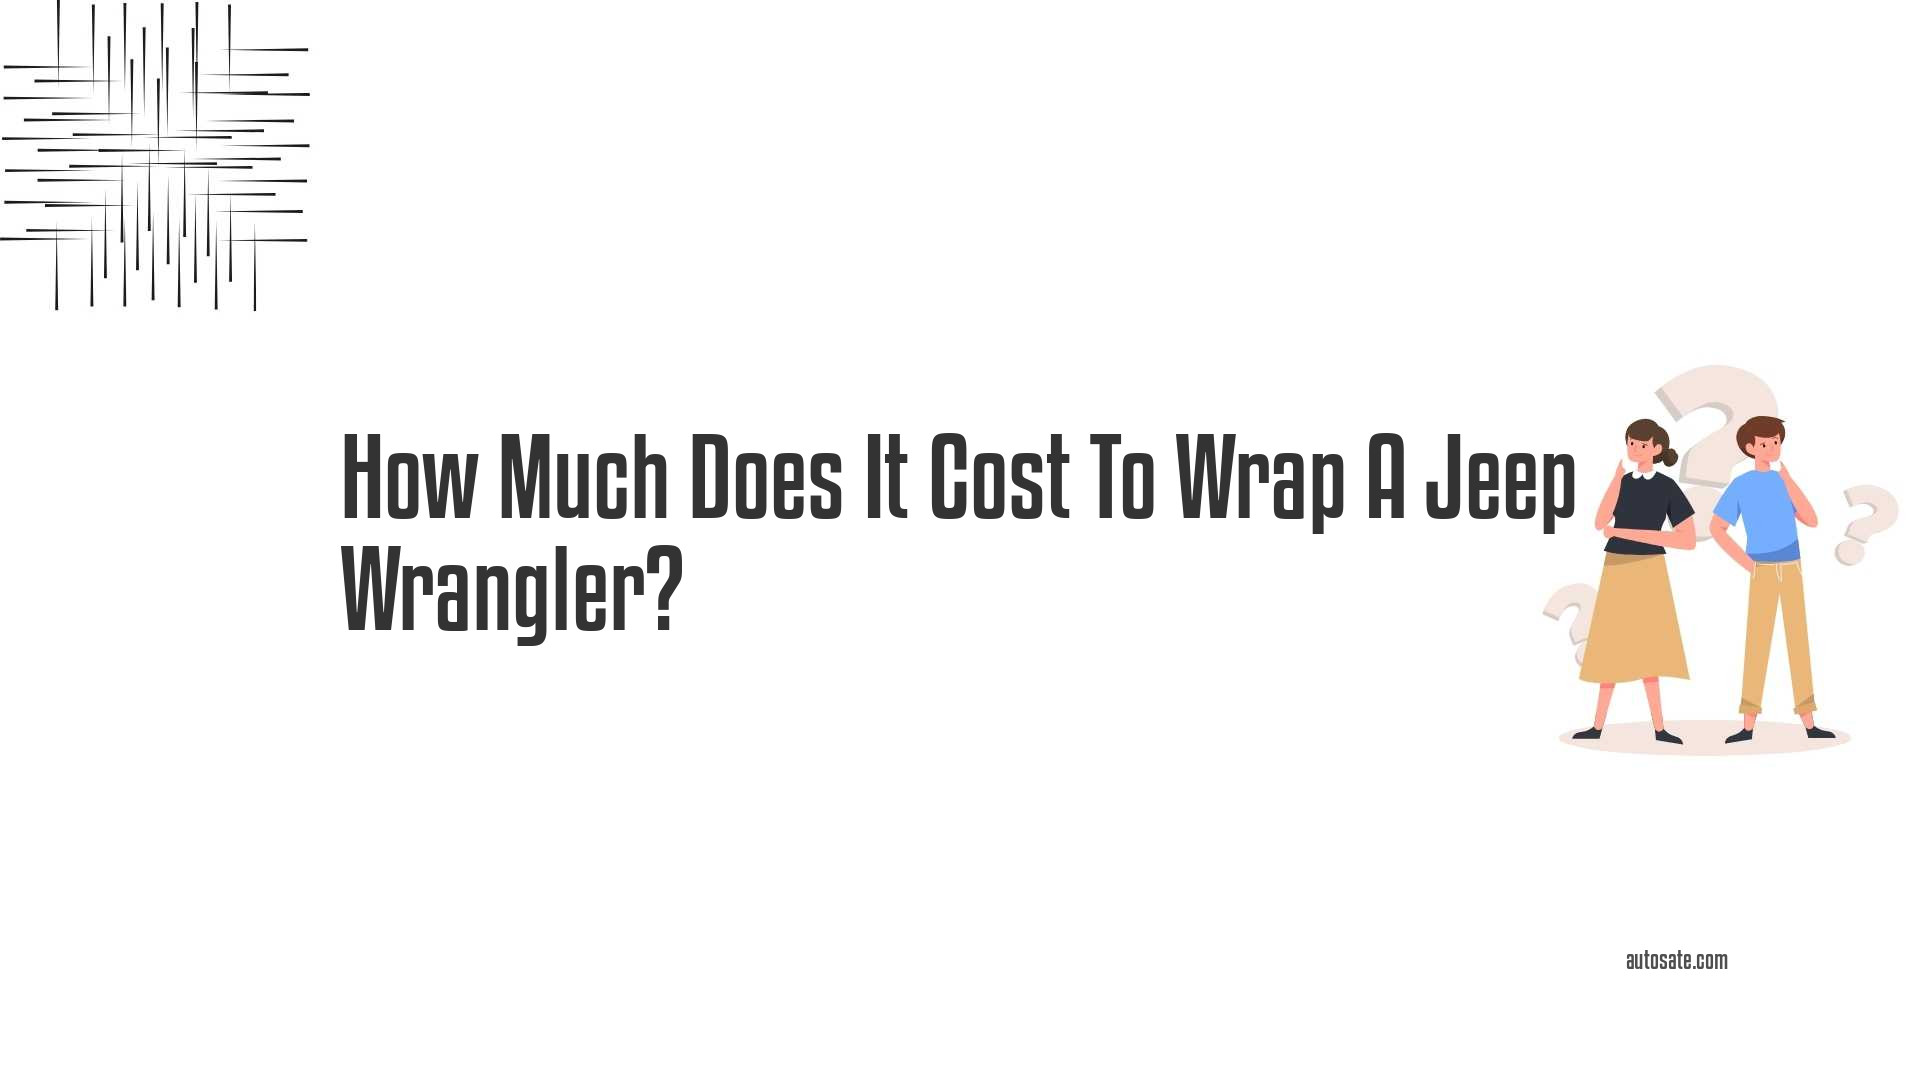 How Much Does It Cost To Wrap A Jeep Wrangler?